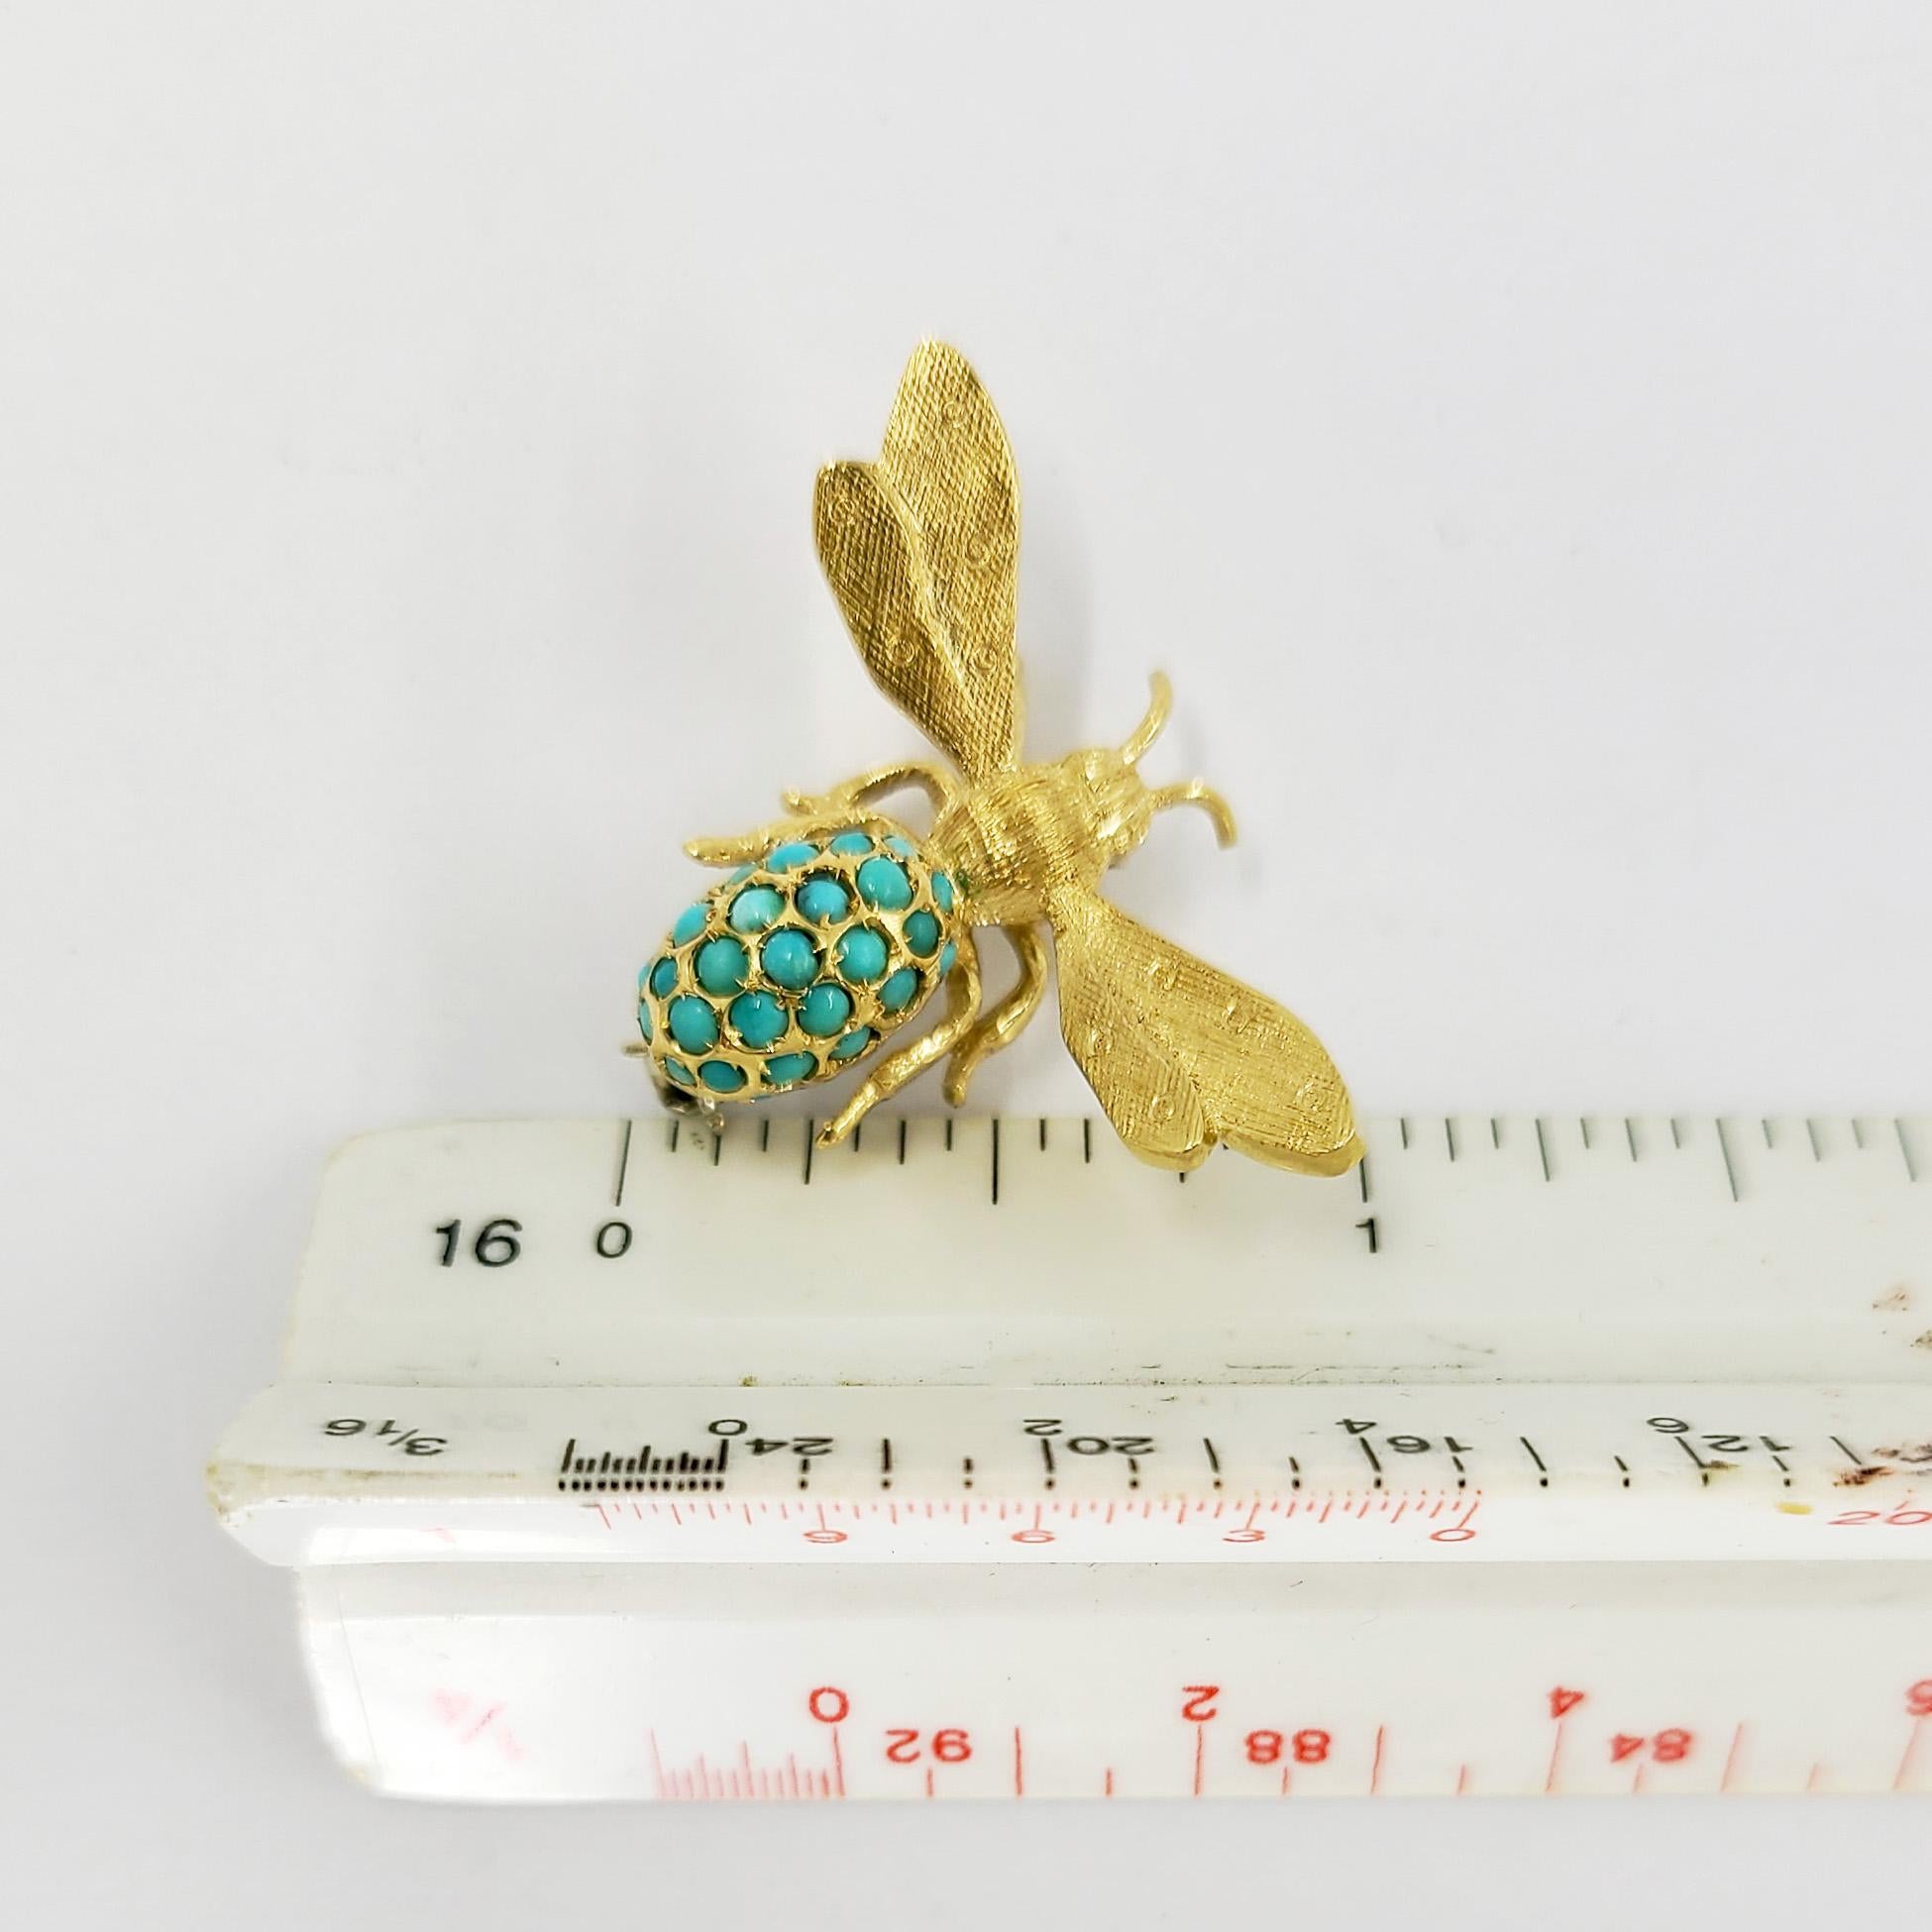 18 Karat Yellow Gold Insect Pin Featuring A Florentine Finish & Turquoise Body. 1 Inch Long By 1.5 Inches Wide. Finished Weight Is 5.0 Grams.